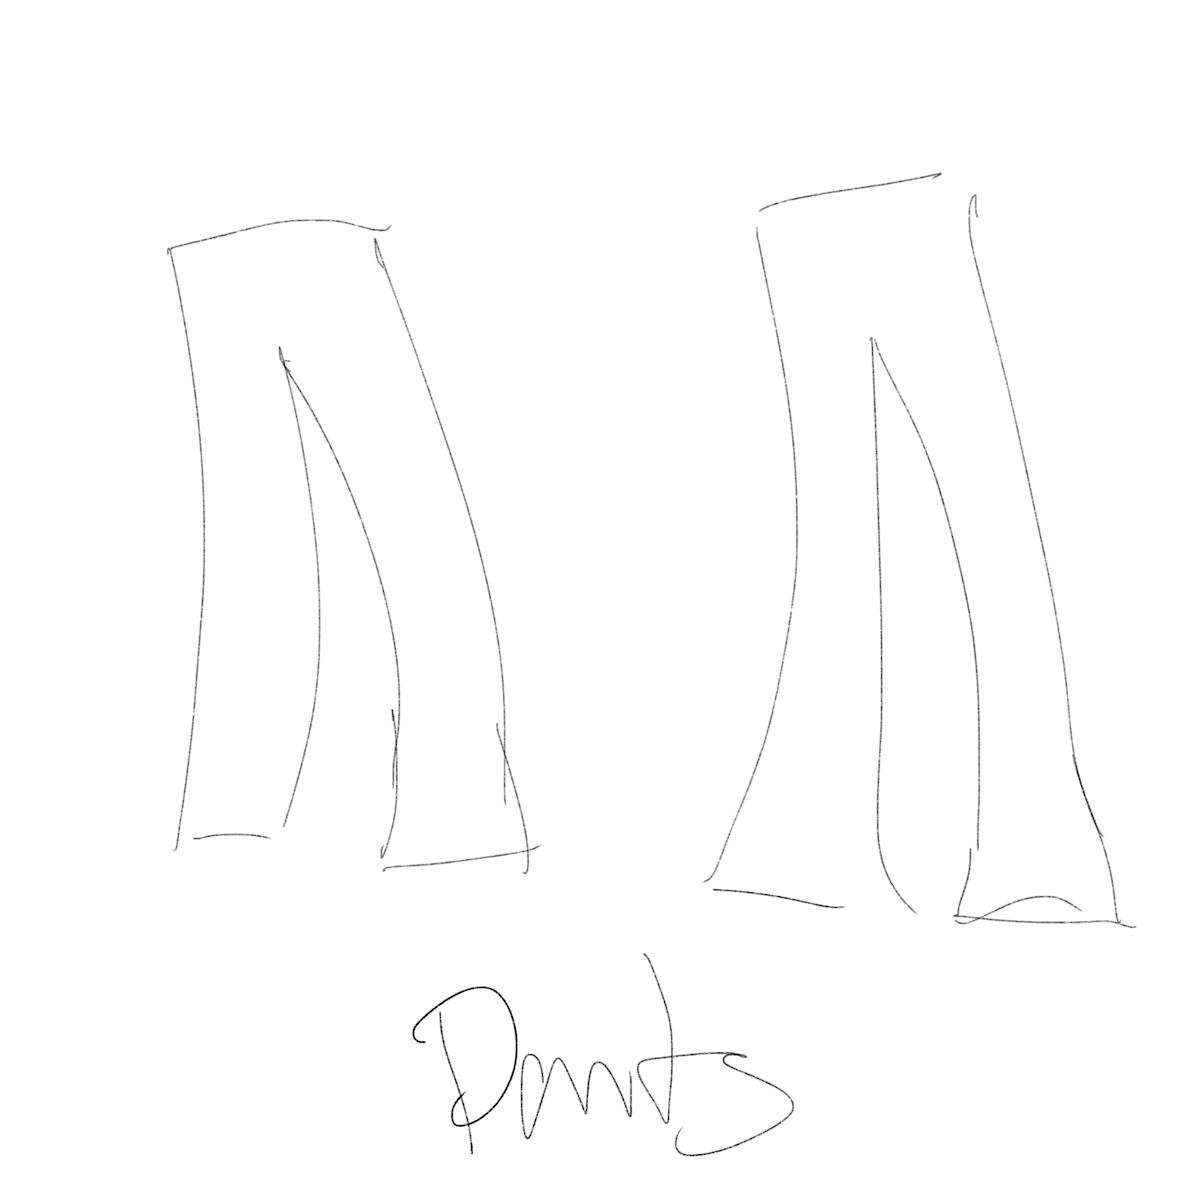 Sketch of two pairs of pants